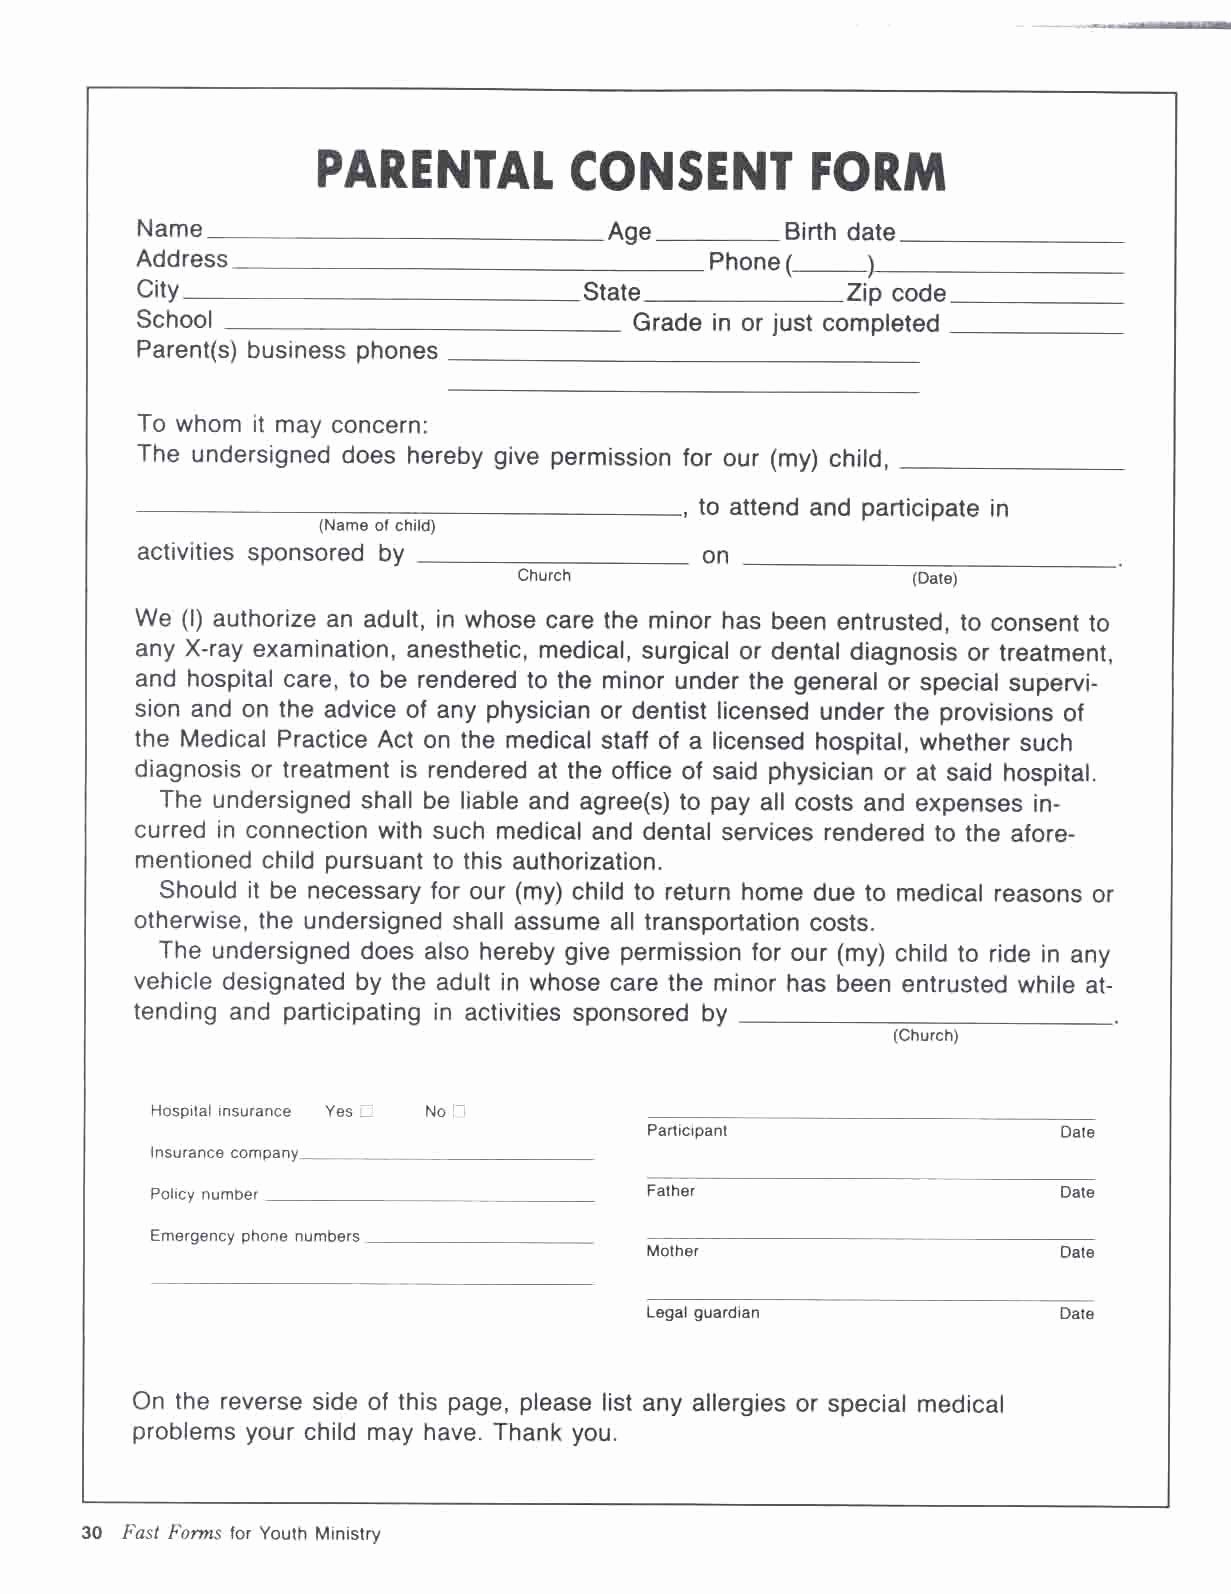 Parental Consent form Template Travel Luxury Paintball